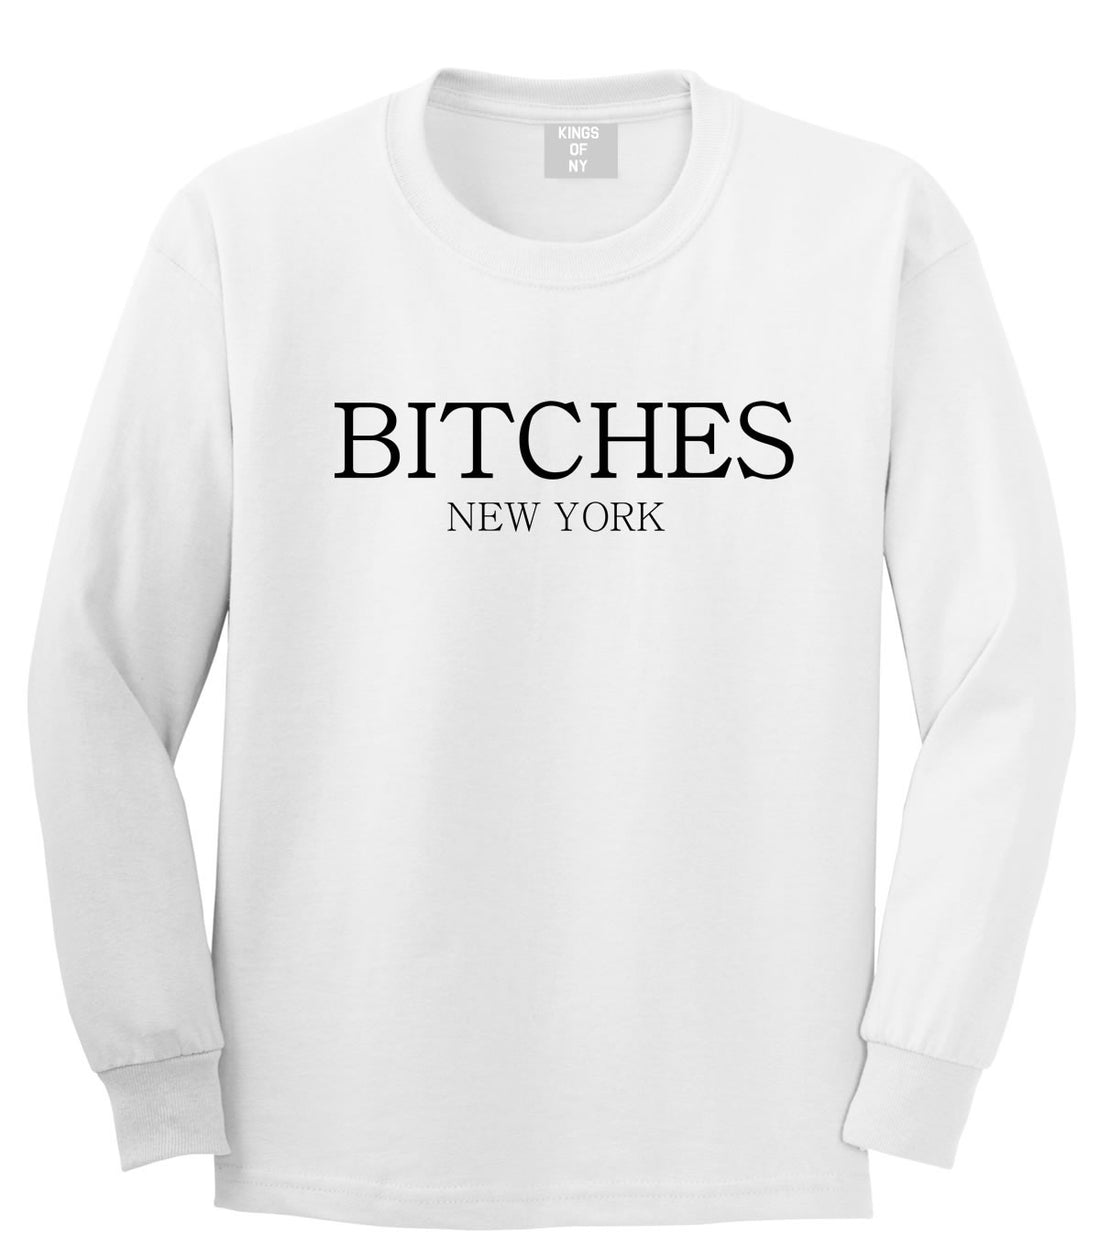  Bitches New York Long Sleeve T-Shirt in White by Kings Of NY